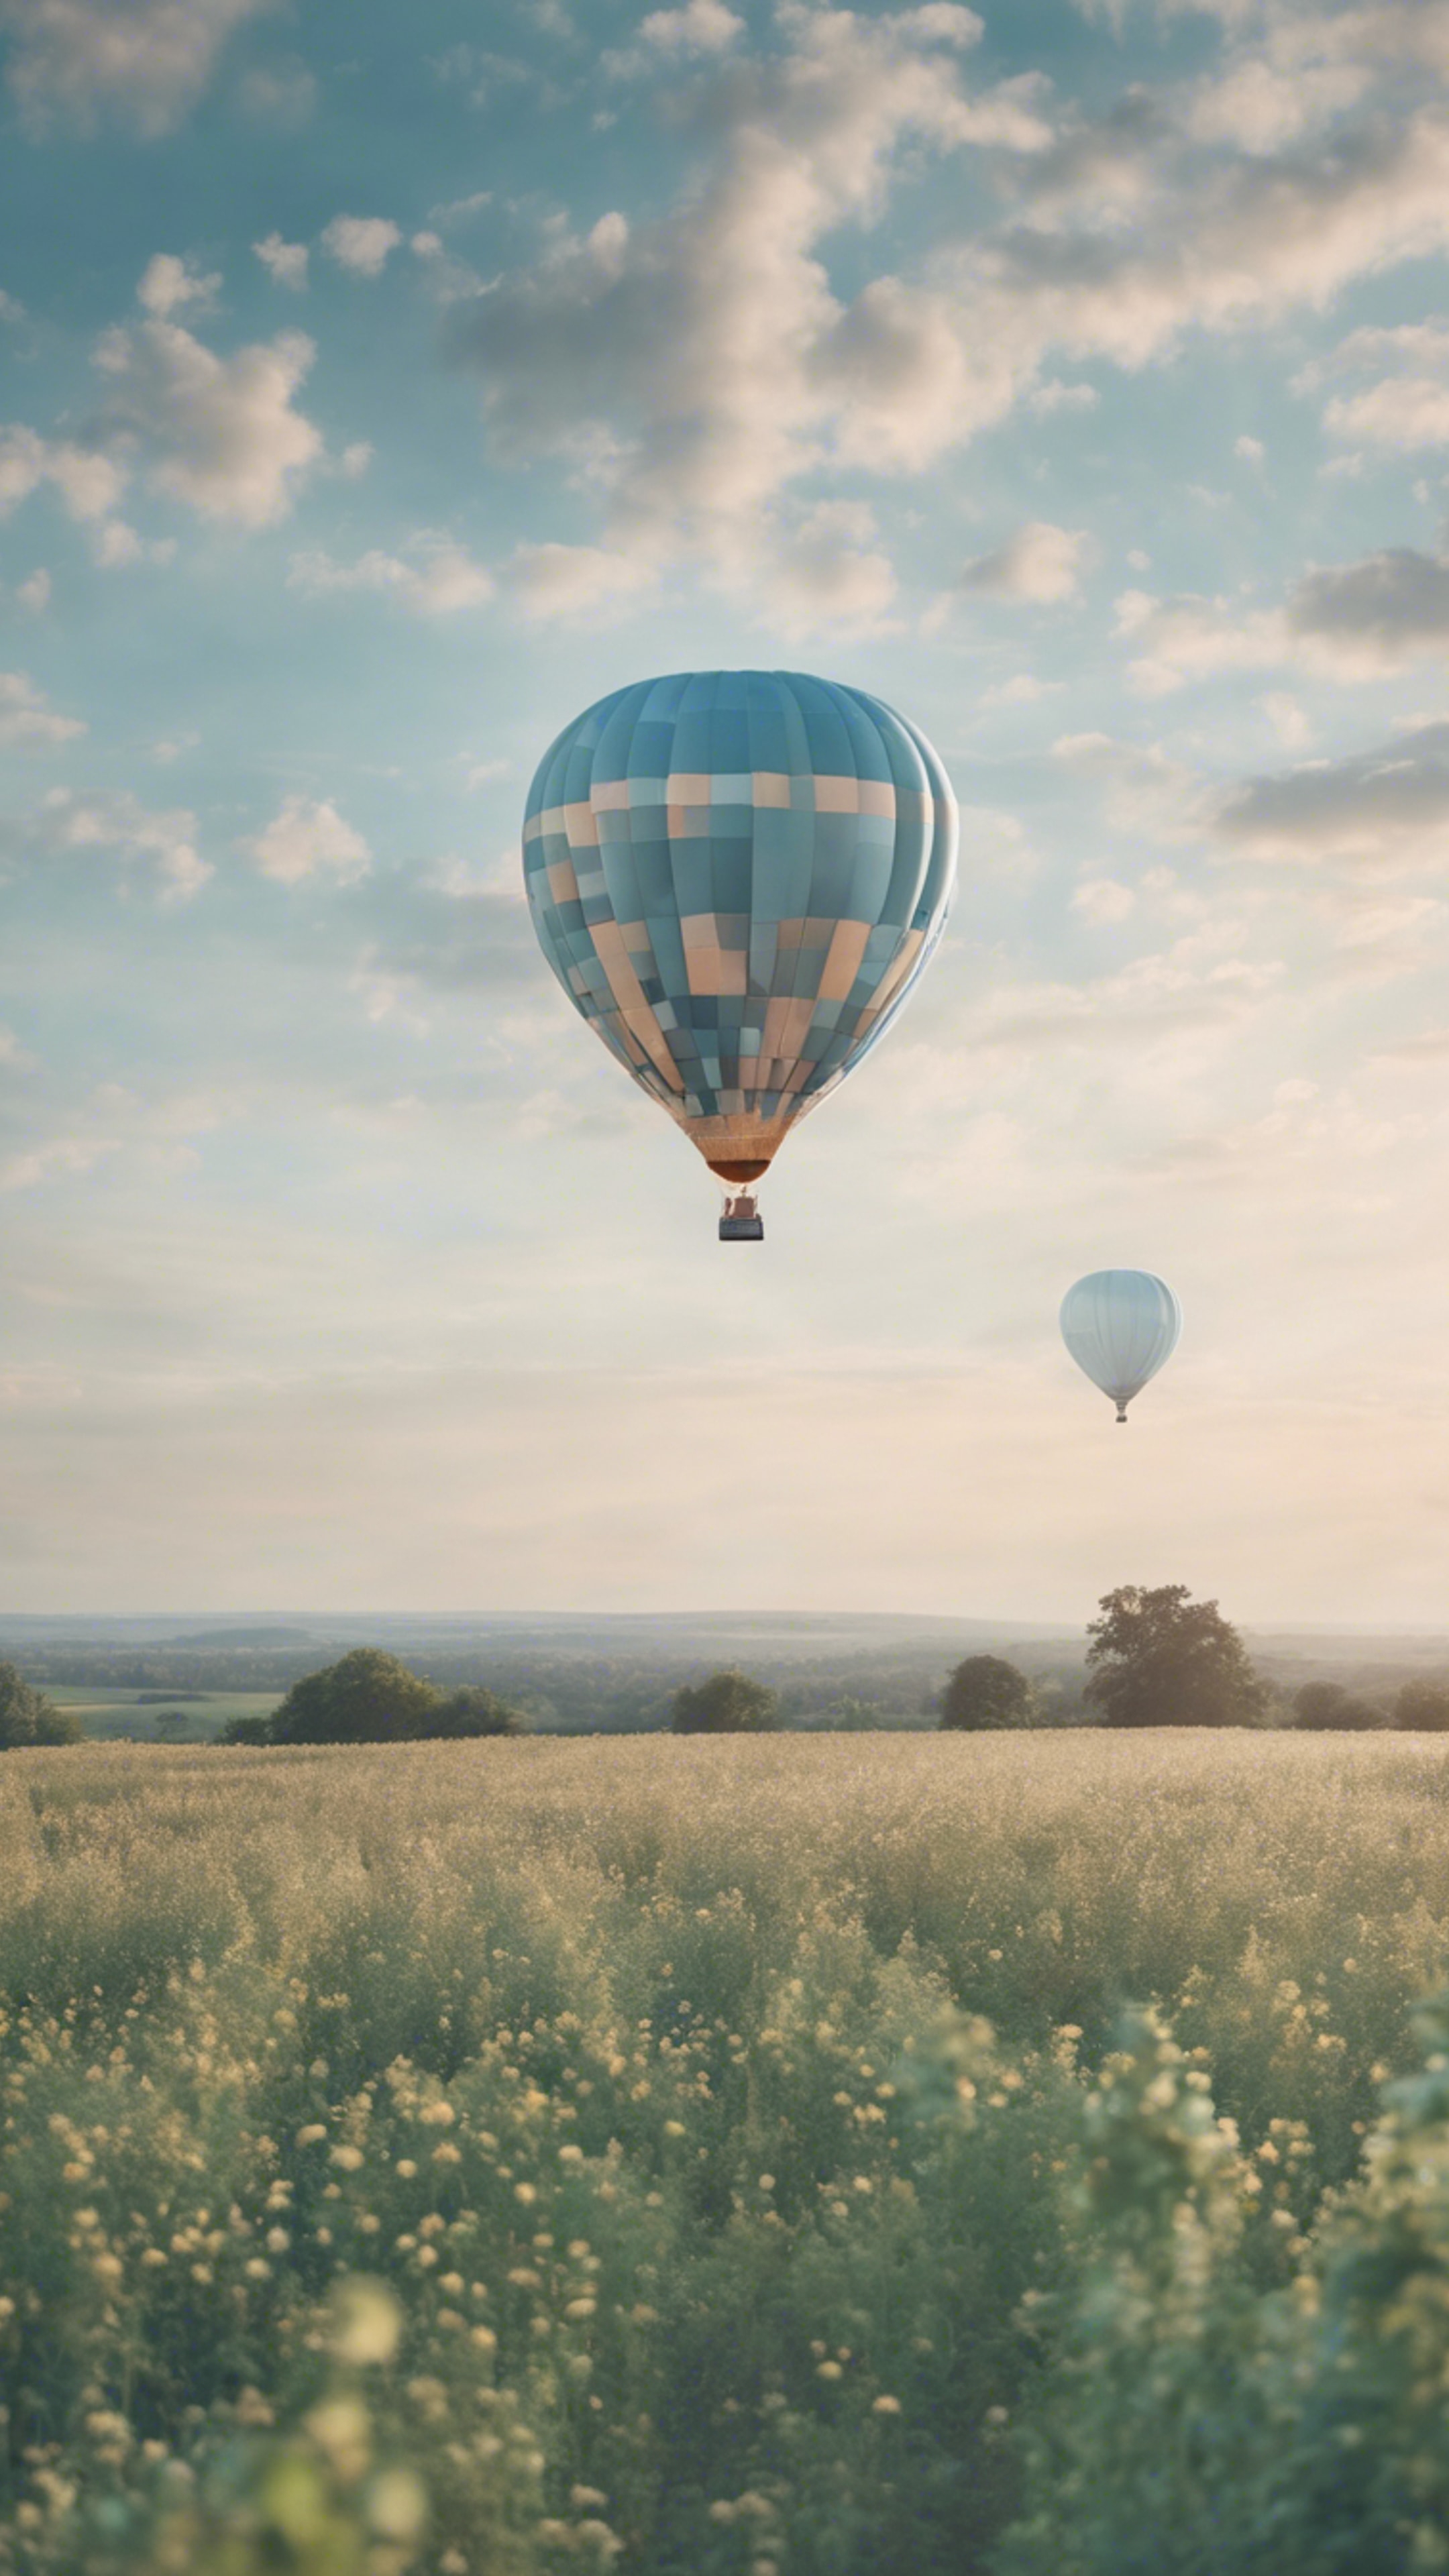 A pastel blue hot air balloon floating serenely above a patchwork field. Tapeta[b19c340976c044f4b3c6]